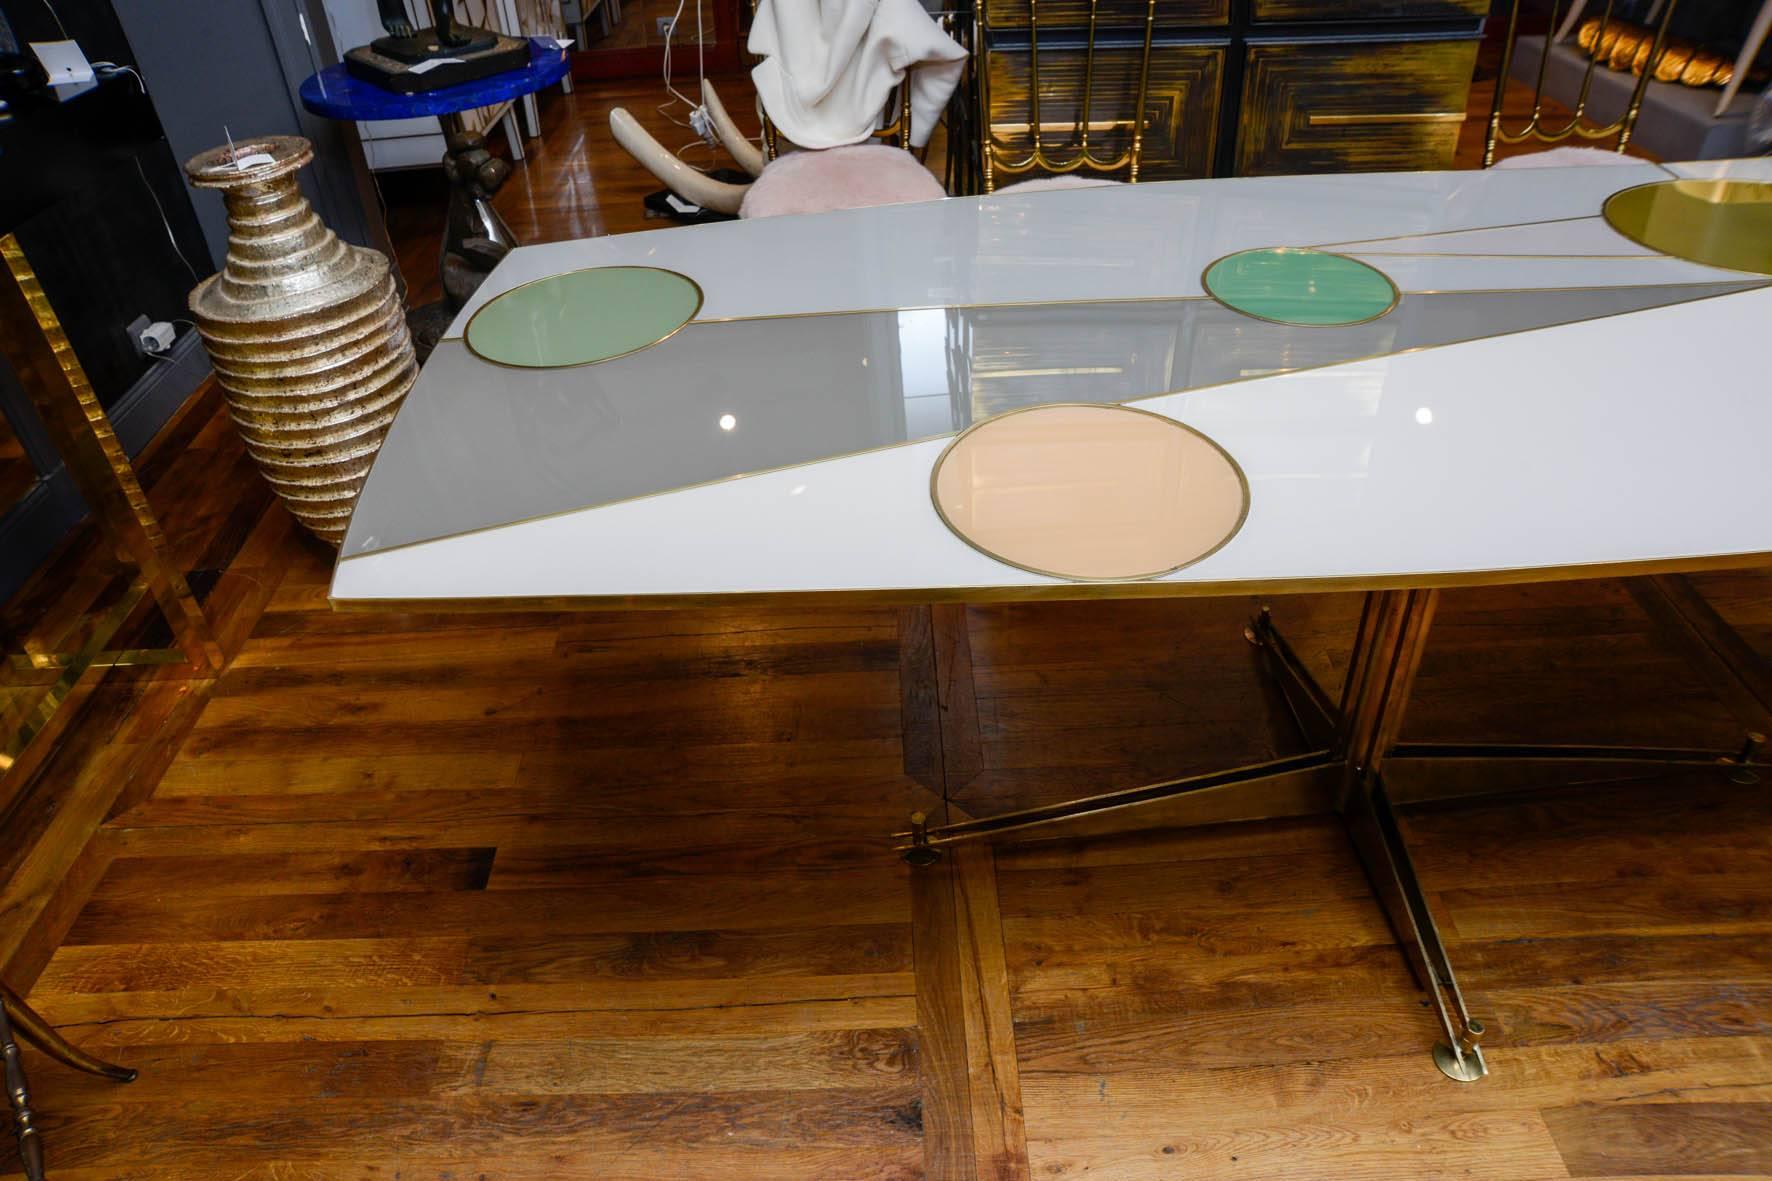 Dining room table with a vintage brass basement and a customized mirror top with brass fillets laid.
Unique piece.